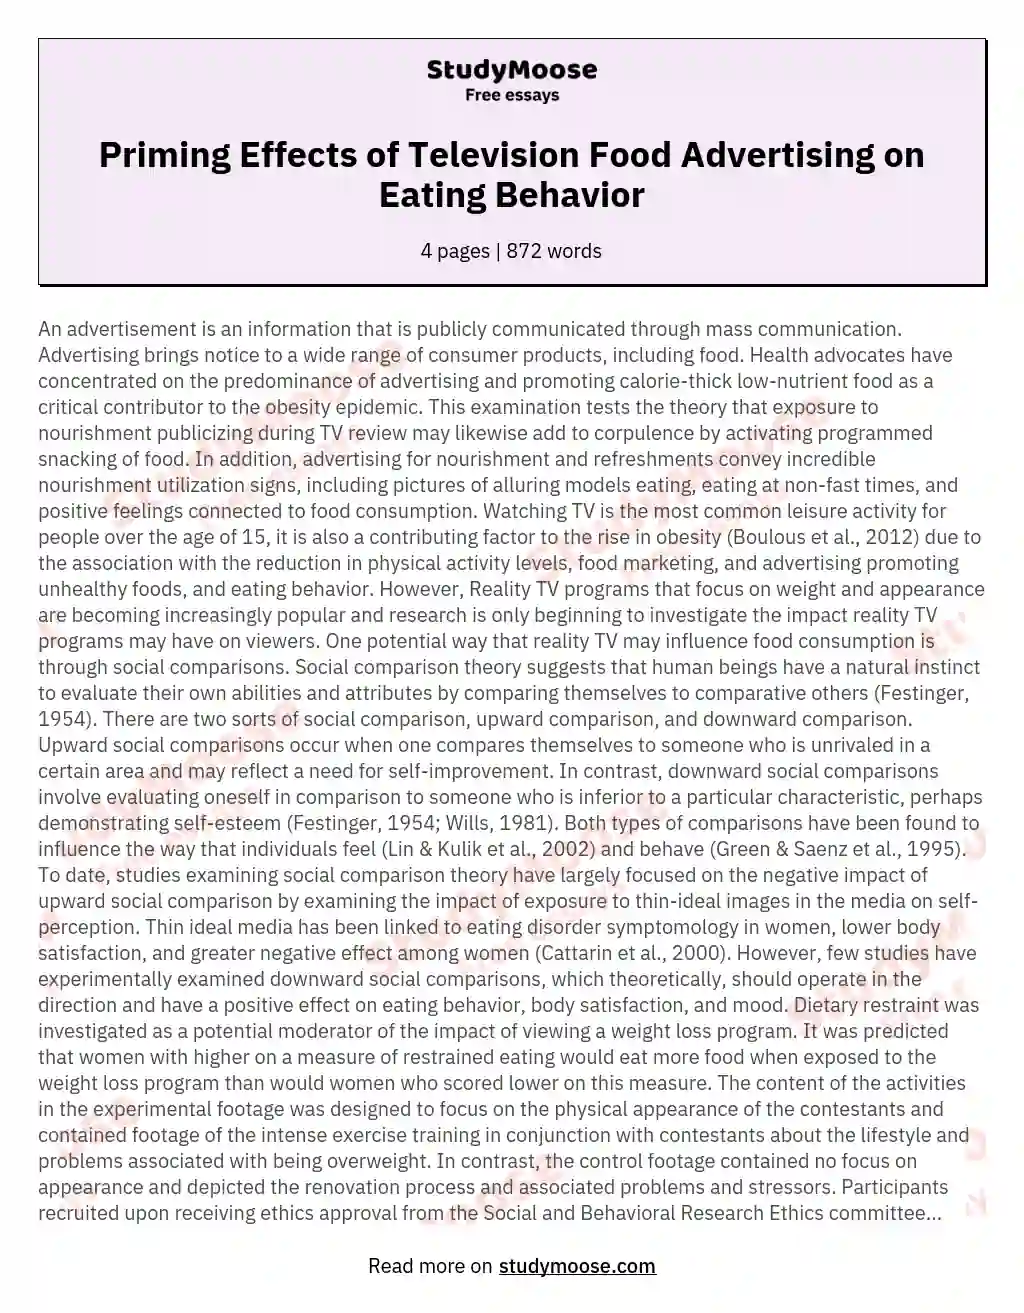 Priming Effects of Television Food Advertising on Eating Behavior